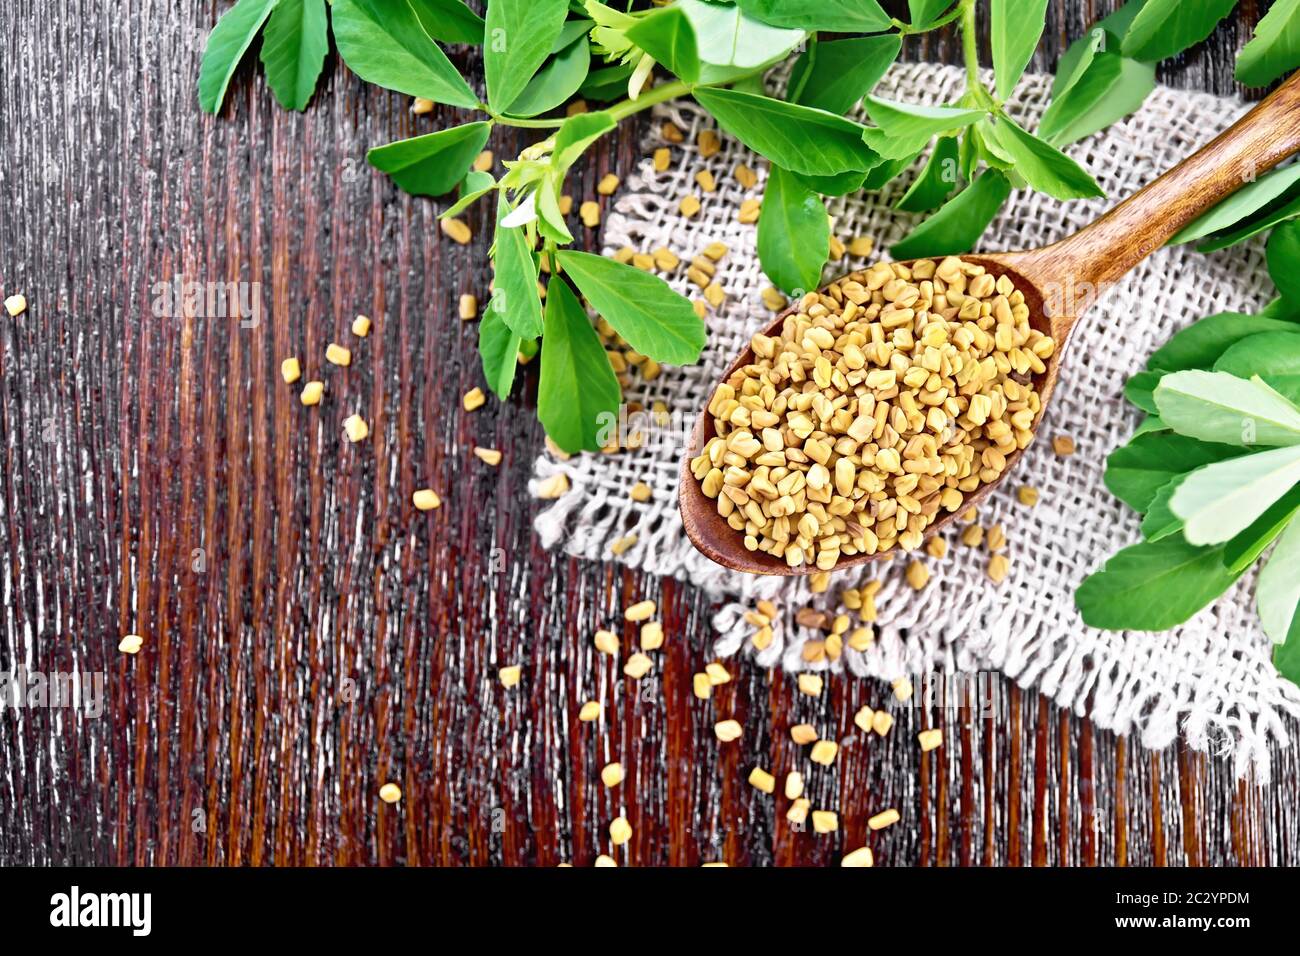 Fenugreek seeds in a spoon on a burlap napkin with green leaves on wooden board background from above Stock Photo